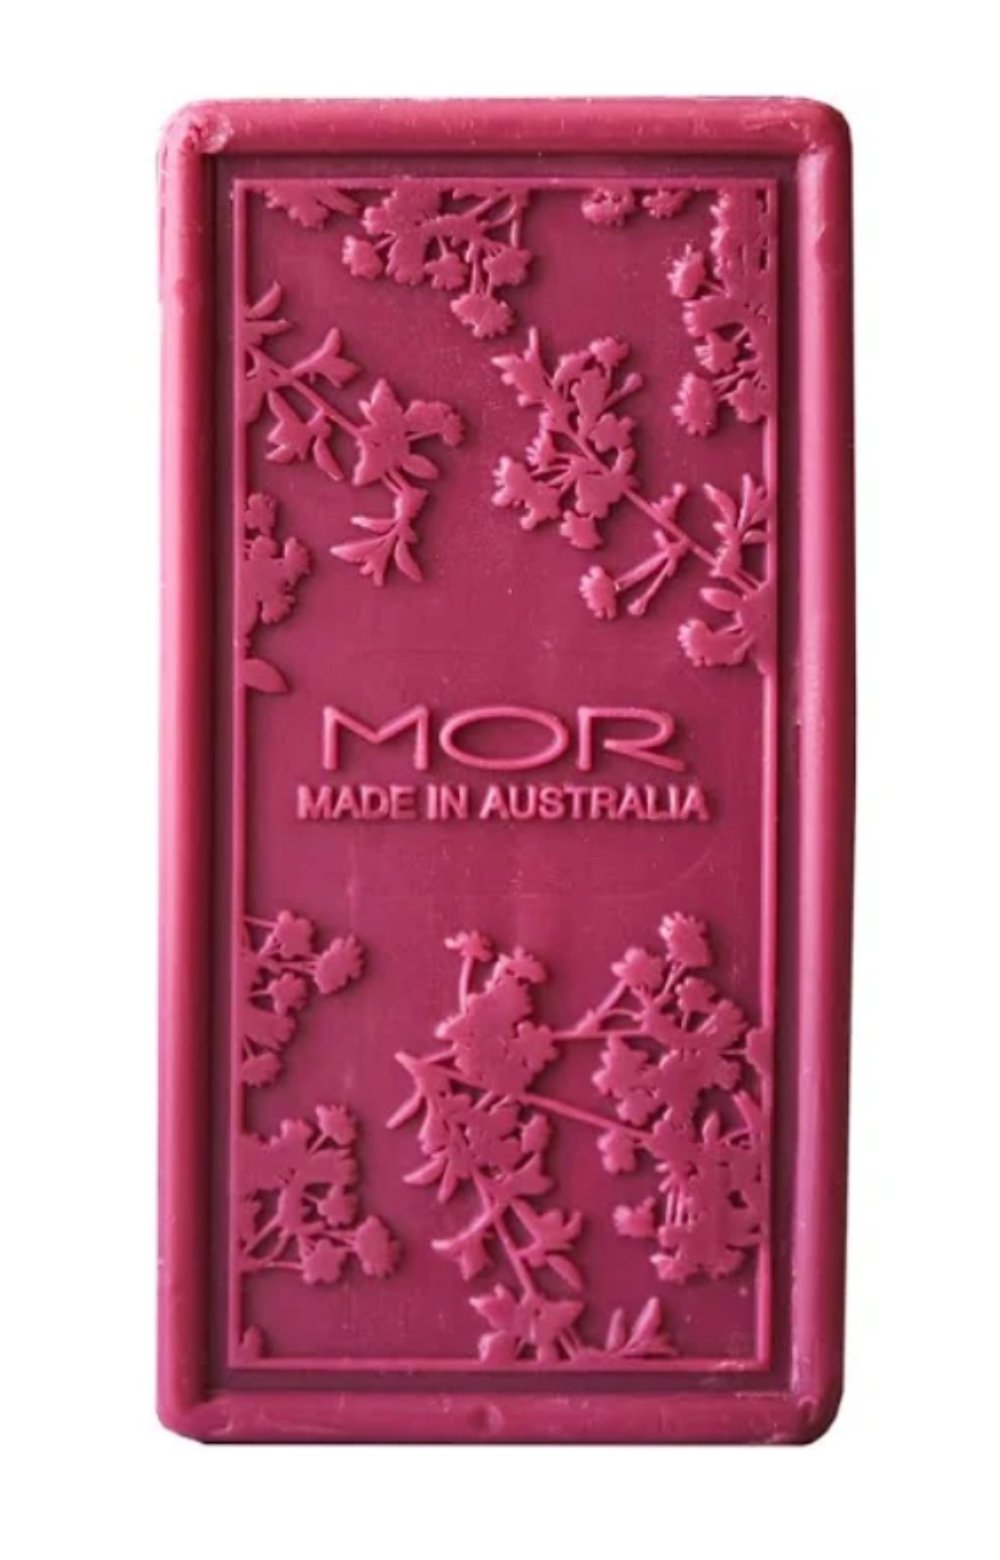 MOR Peony Blossom Boxed Triple-Milled Soap 180g - The Face Method